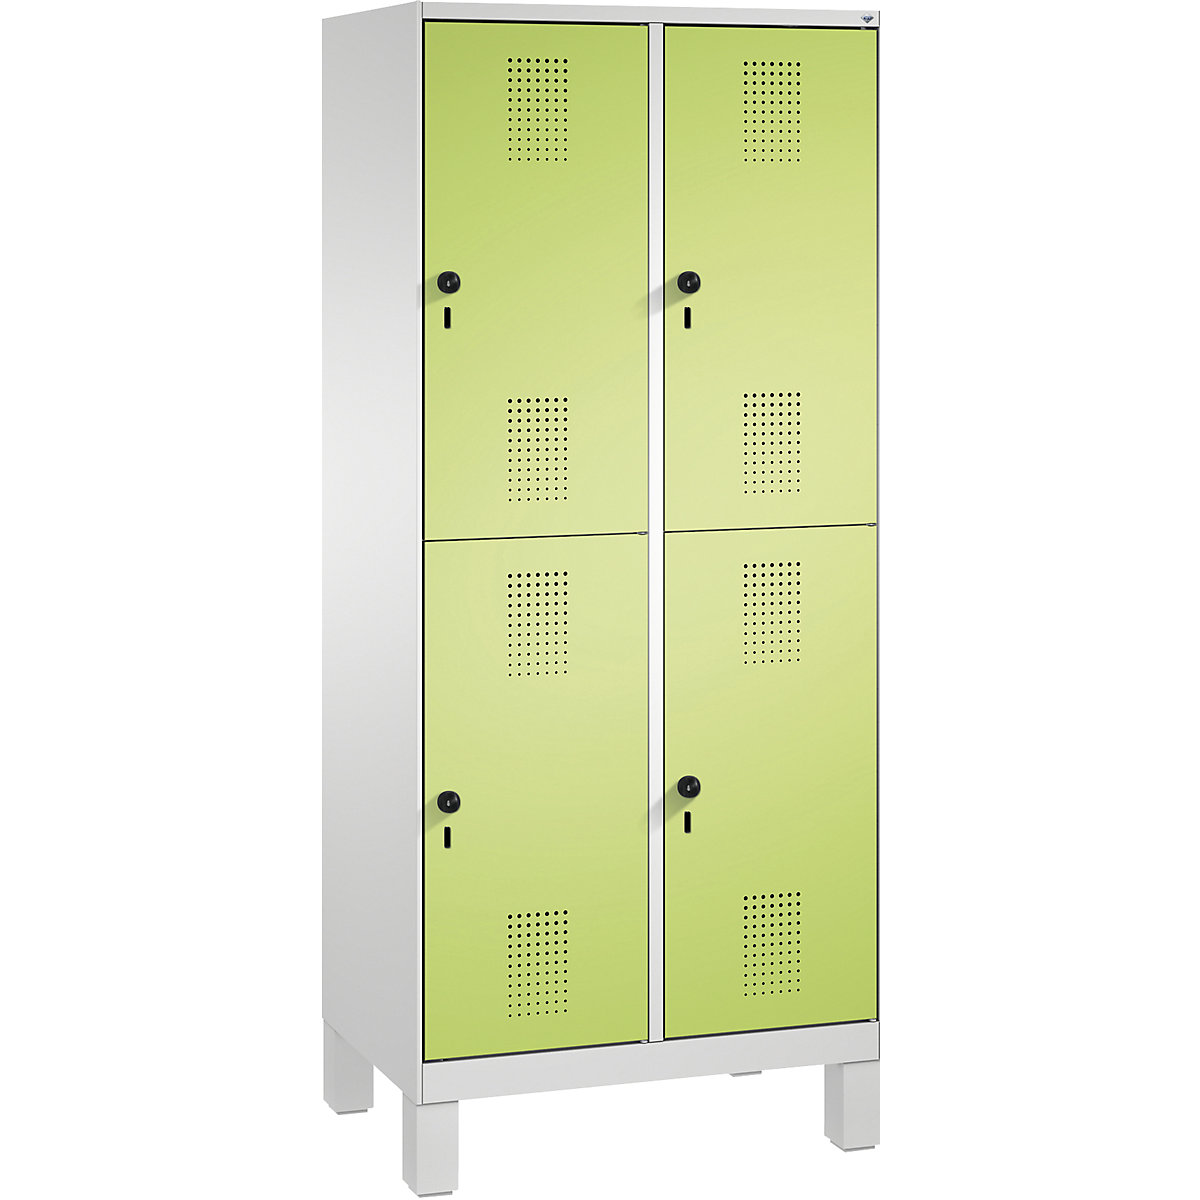 EVOLO cloakroom locker, double tier, with feet – C+P, 2 compartments, 2 shelf compartments each, compartment width 400 mm, light grey / viridian green-11